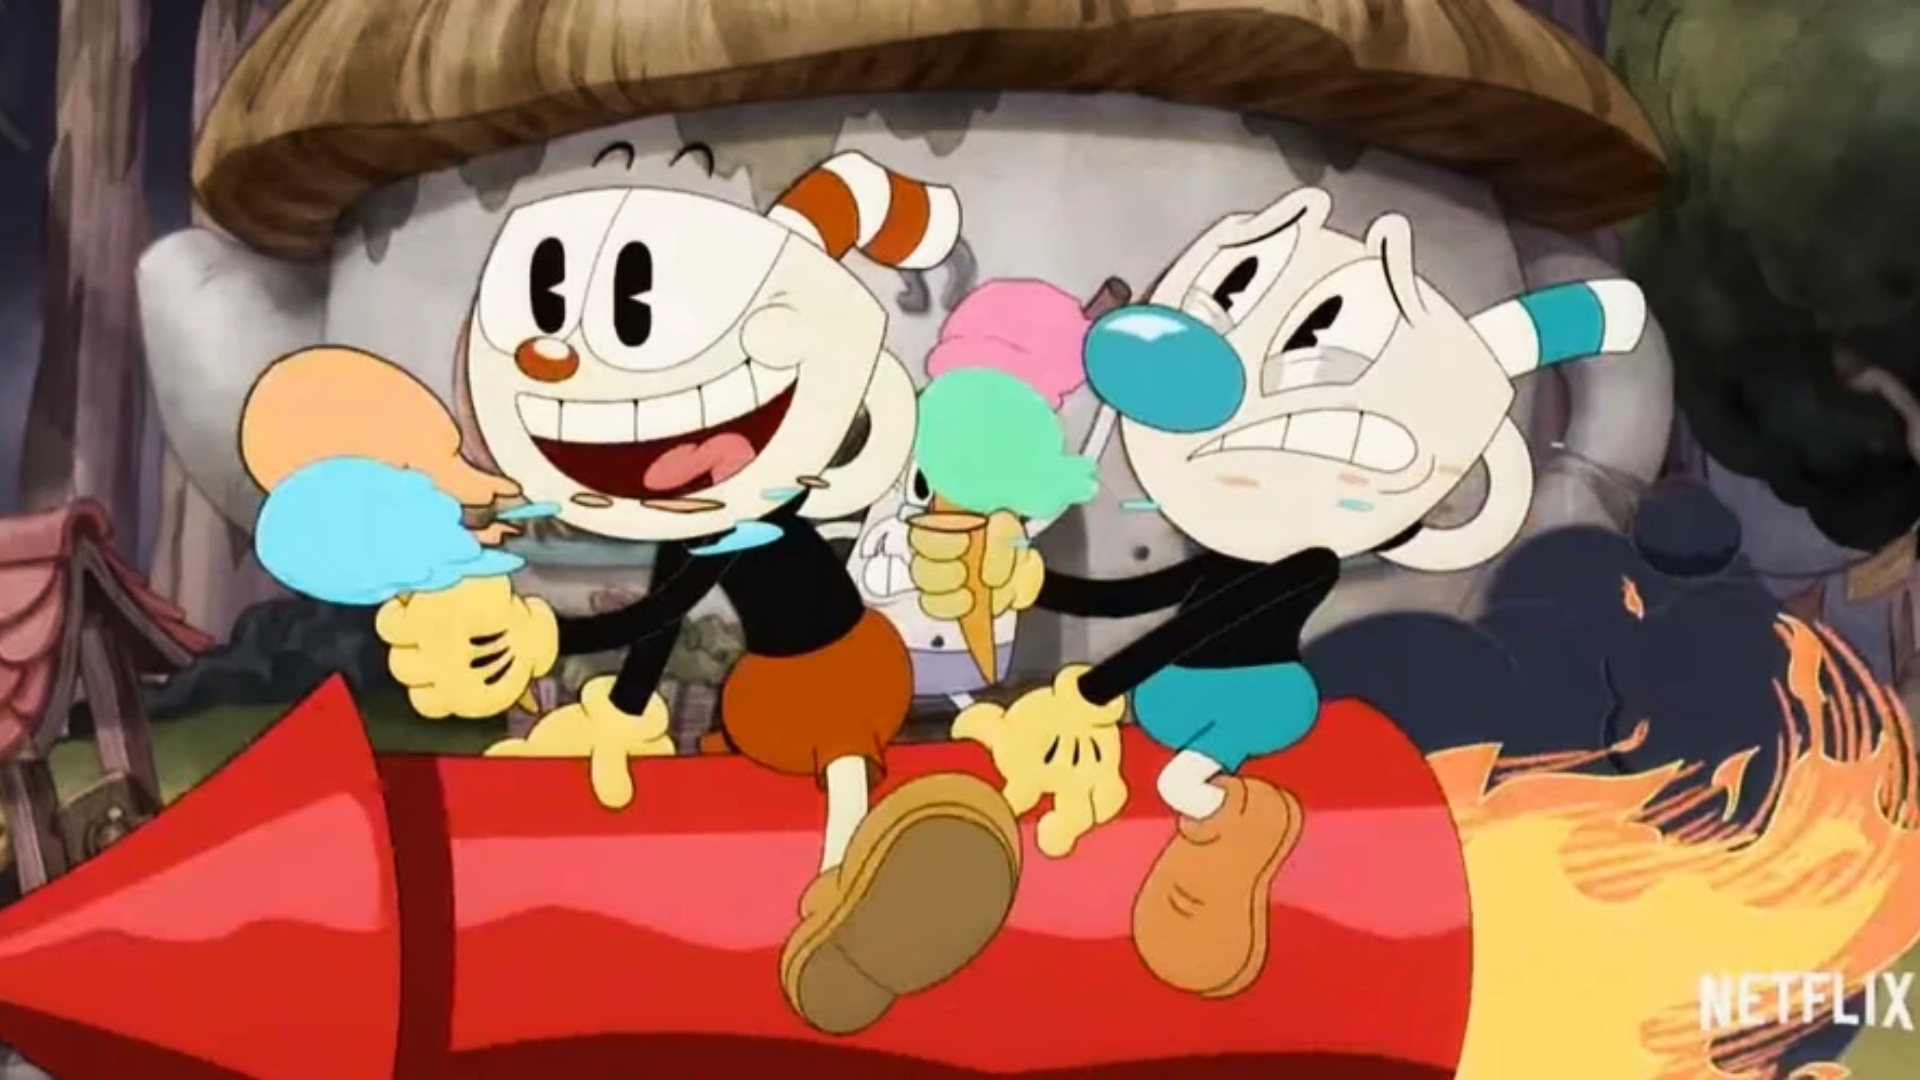 Netflix download - Cuphead and Mugman eating ice cream on top of a moving rocket